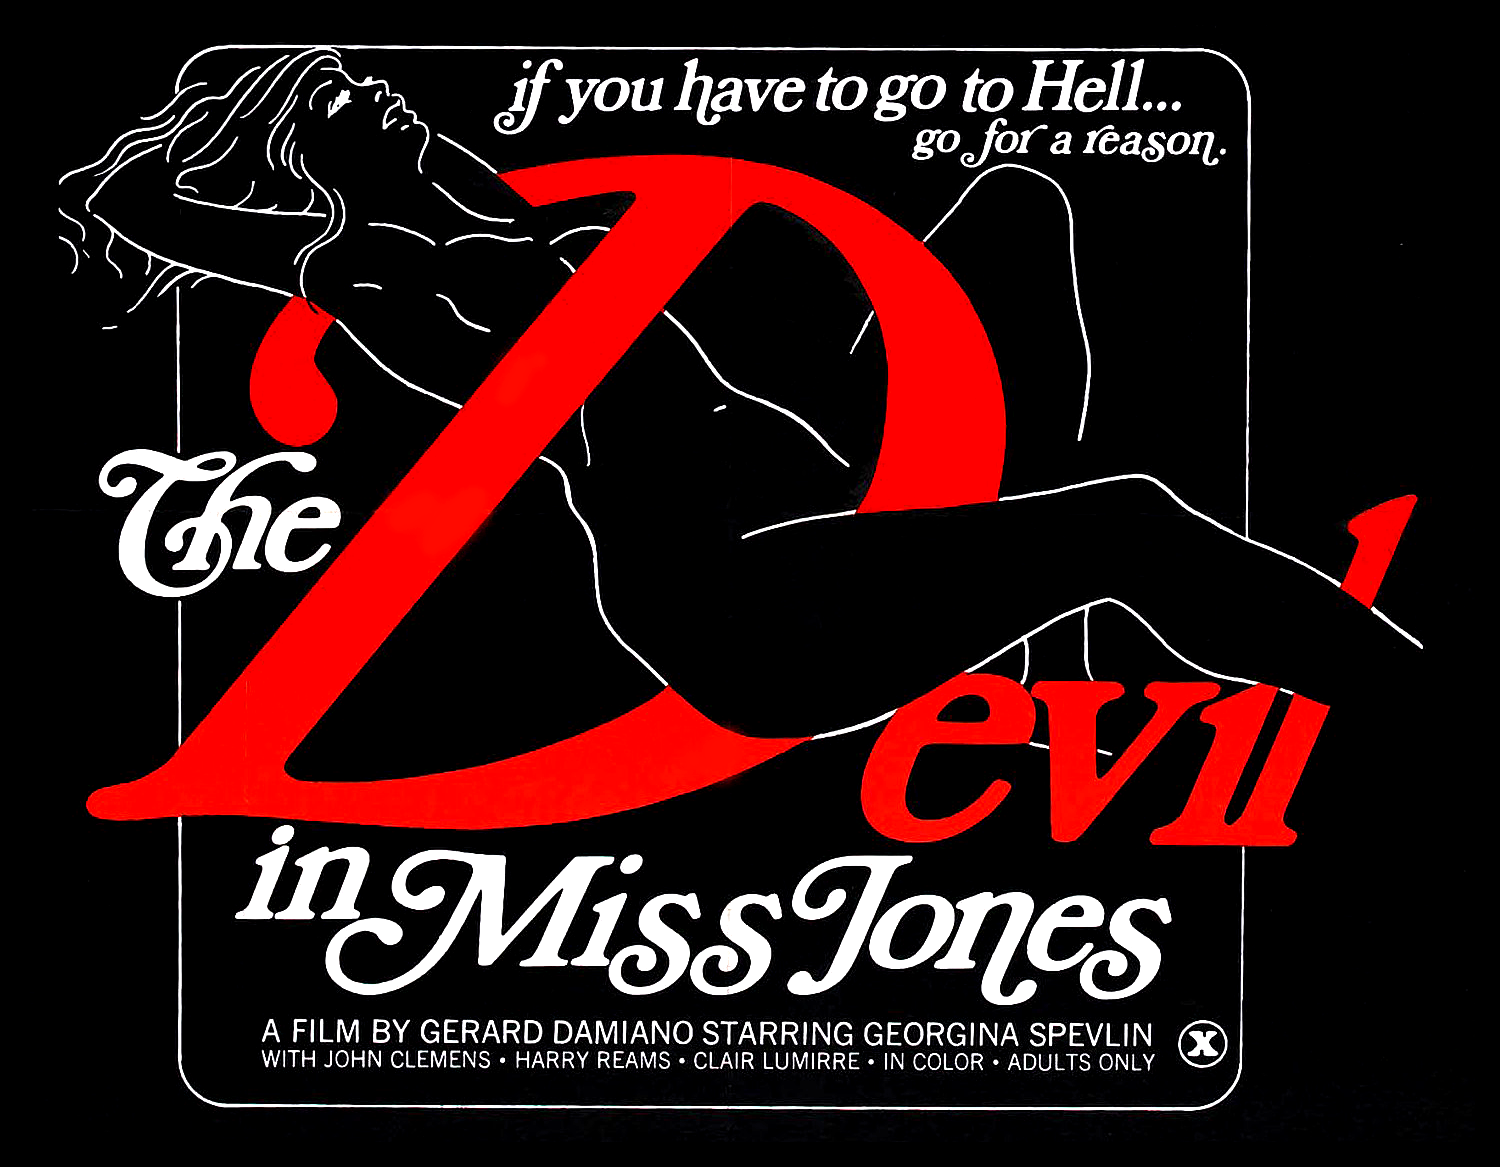 Masterpiece of ‘Porno Chic’ Gerard Damiano Sr.’s “The Devil in Miss Jones” returns to theaters to celebrate its 50th Anniversary